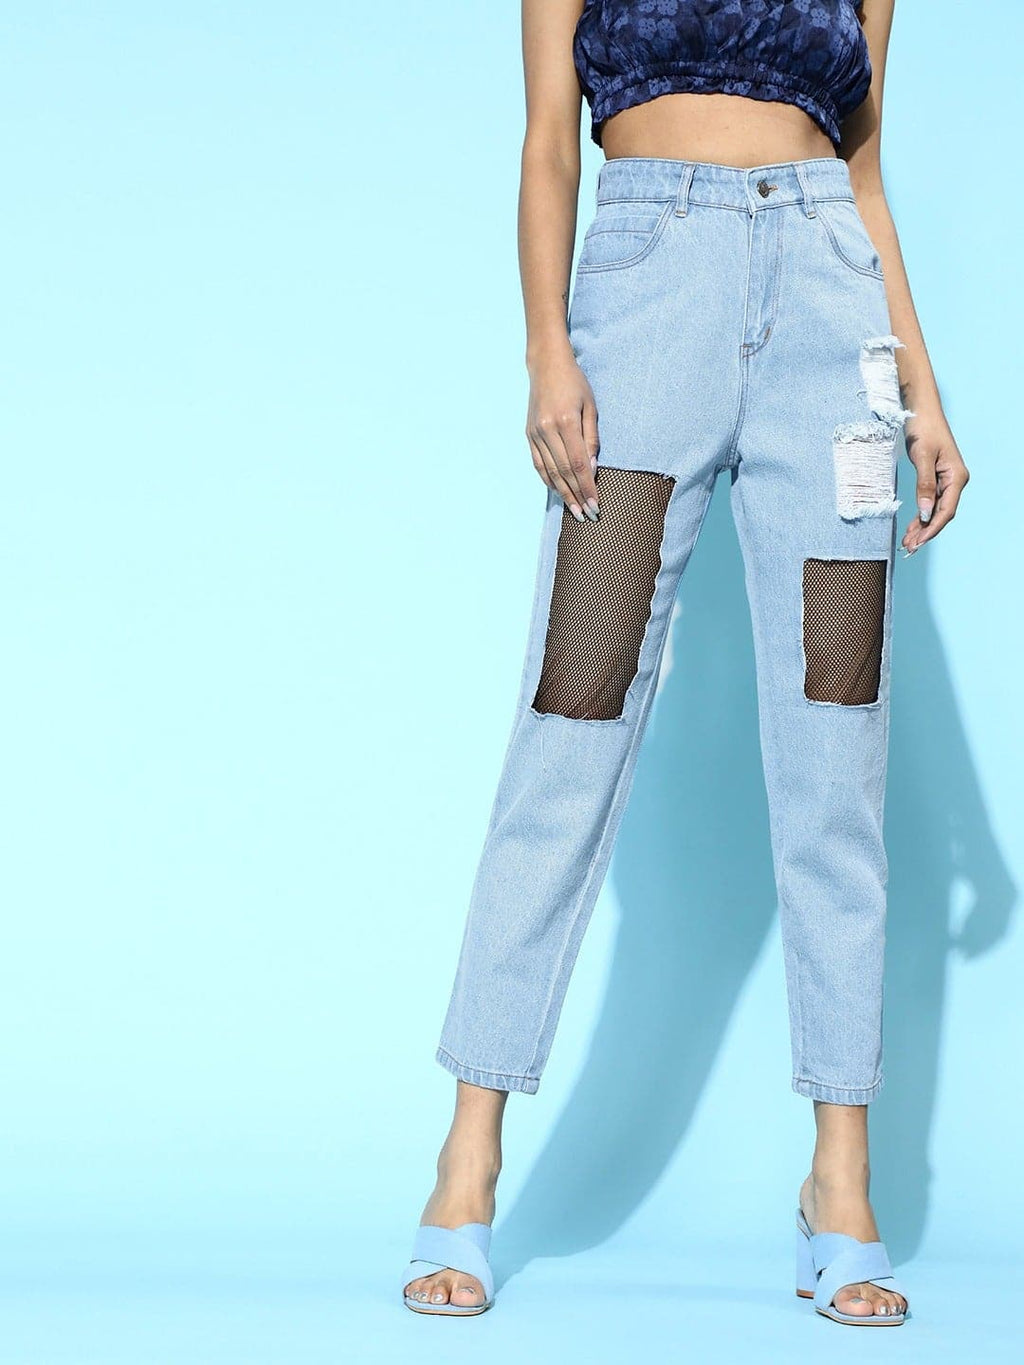 Mesh Patchwork Jeans Women Pacthed Jeans High Waisted Jeans 